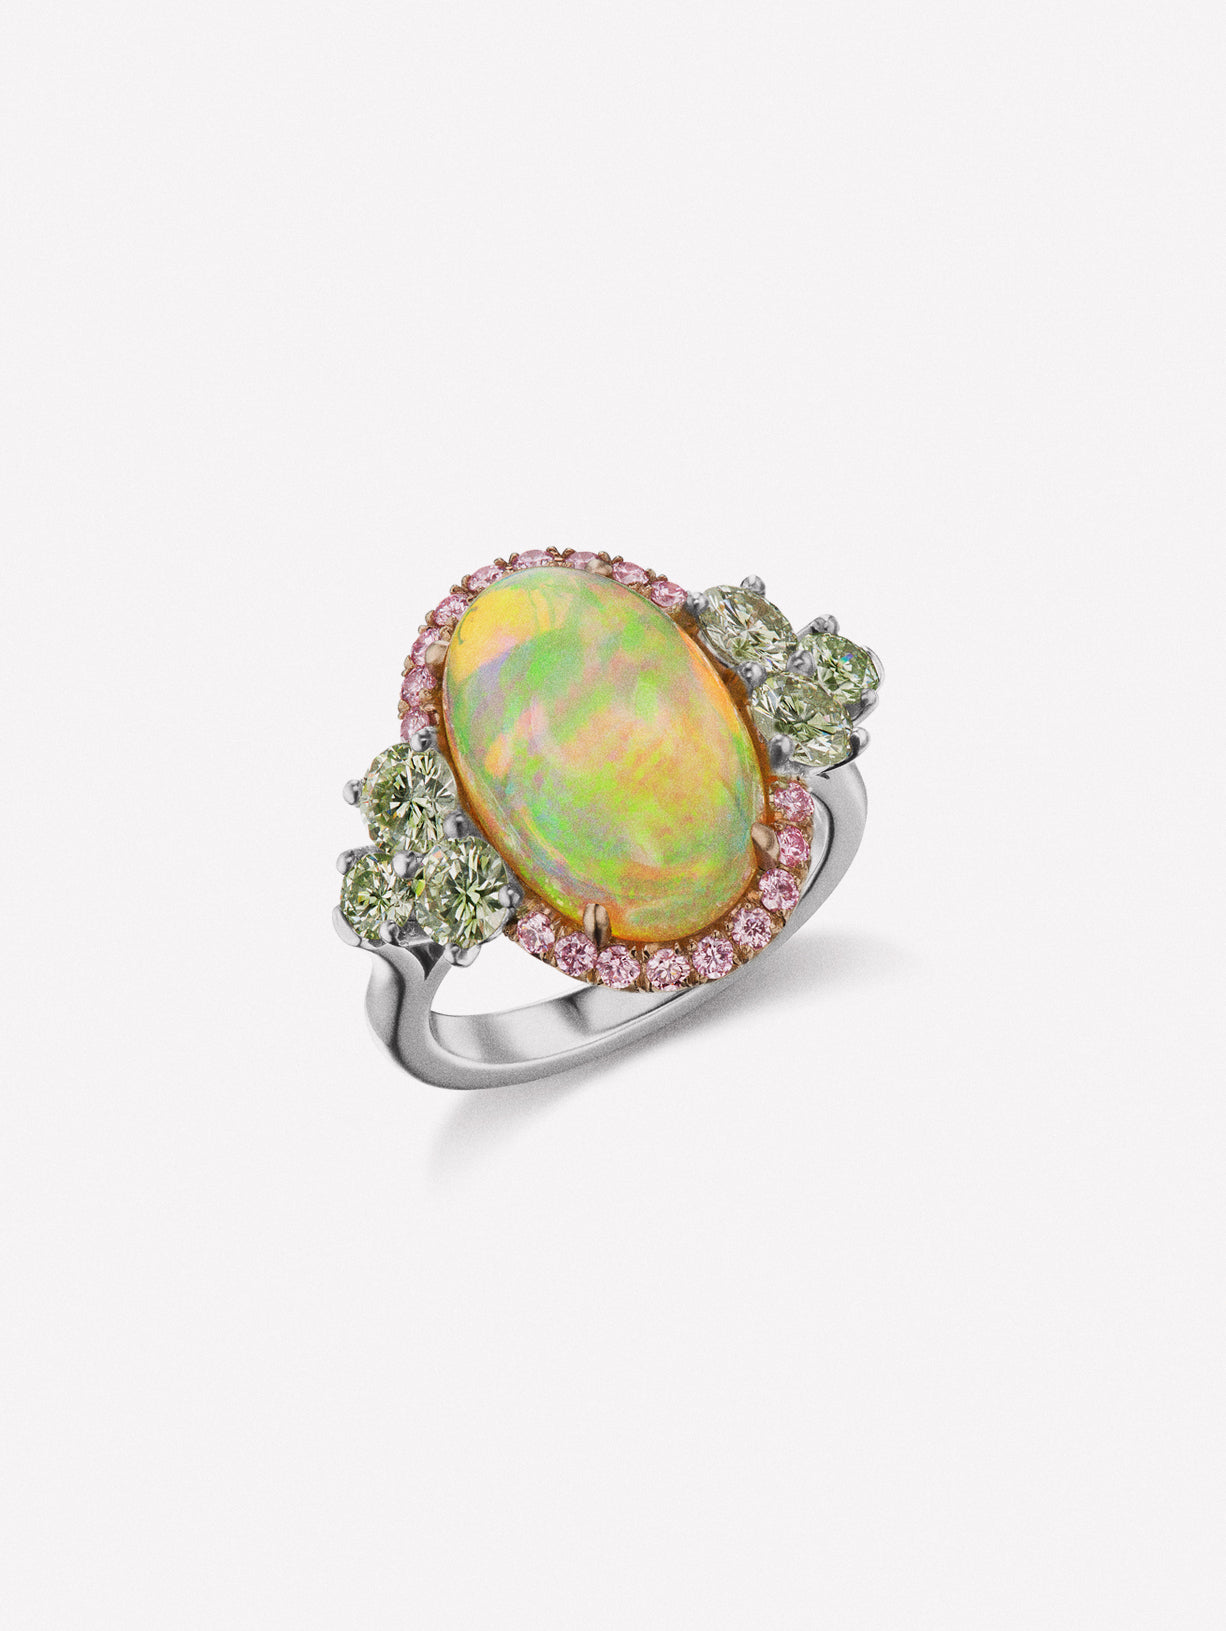 Cabochon Opal and Argyle Pink™ Diamonds Ring - Pink Diamonds, J FINE - J Fine, ring - Pink Diamond Jewelry, cabochon-opal-ring - Argyle Pink Diamonds